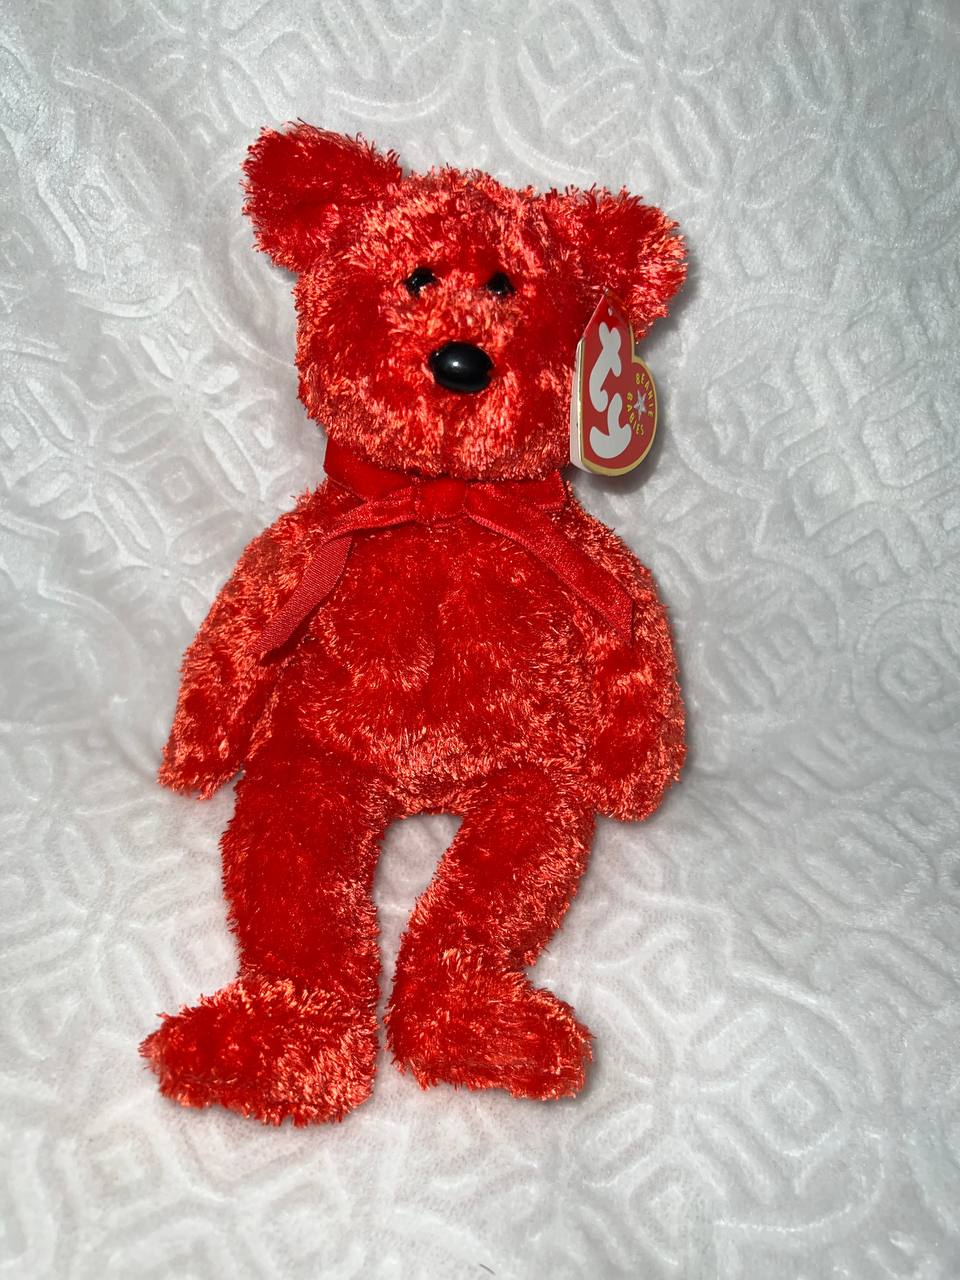 *RARE* MINT Sizzle Beanie Baby 2001 With Tag